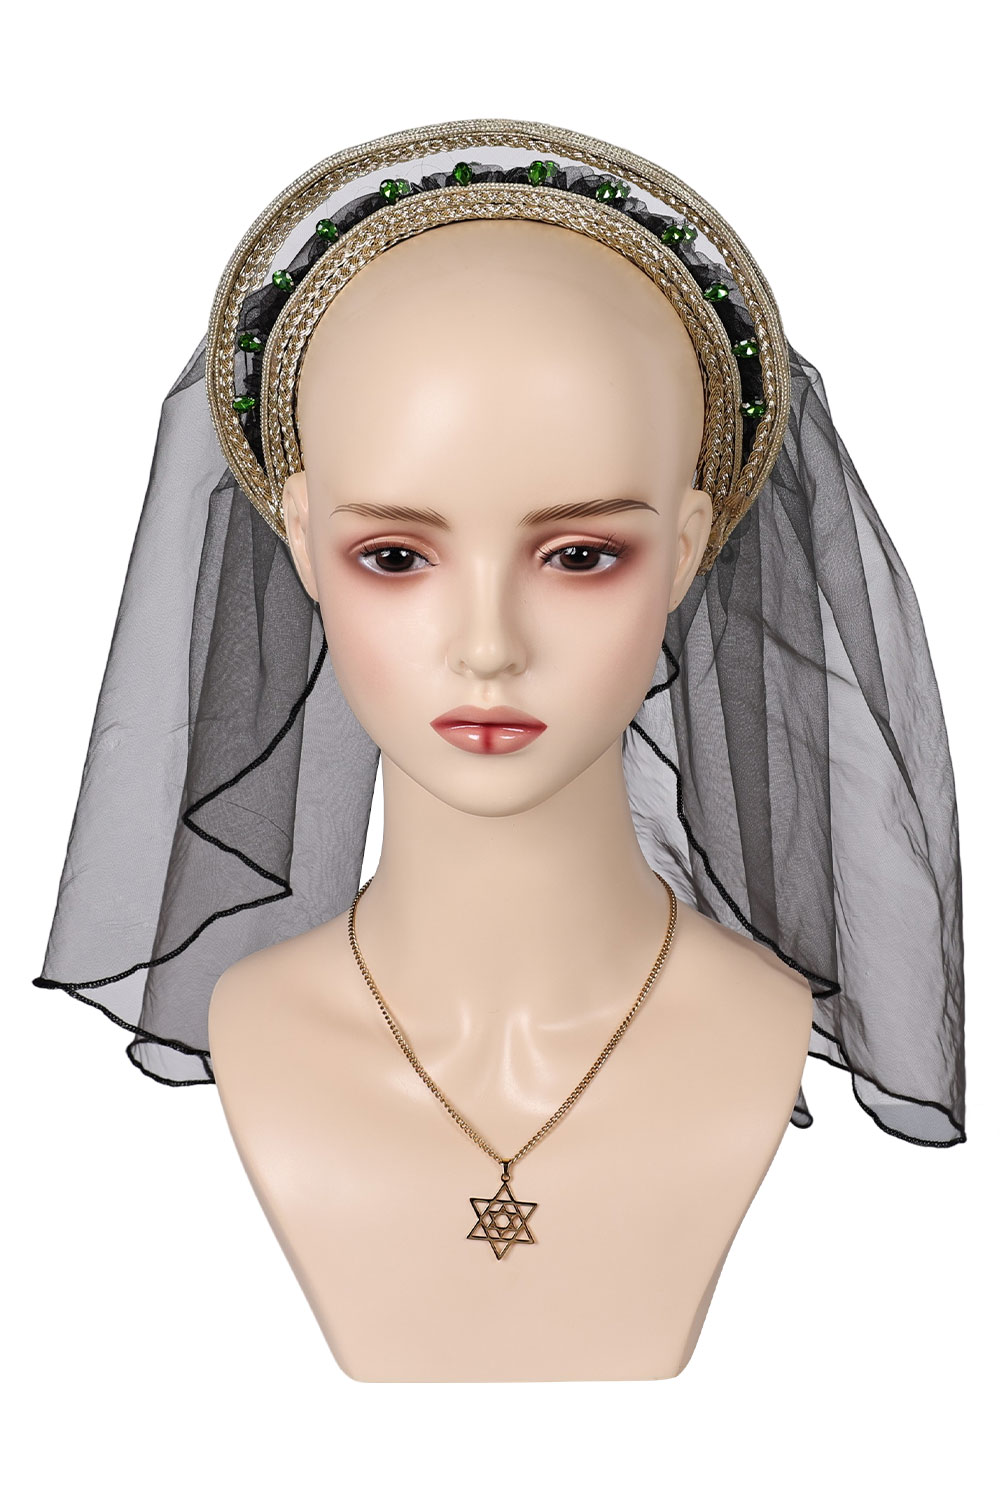 TV House of the Dragon Season 2 Alicent Hightower Veil Necklace Halloween Costume Accessories Prop